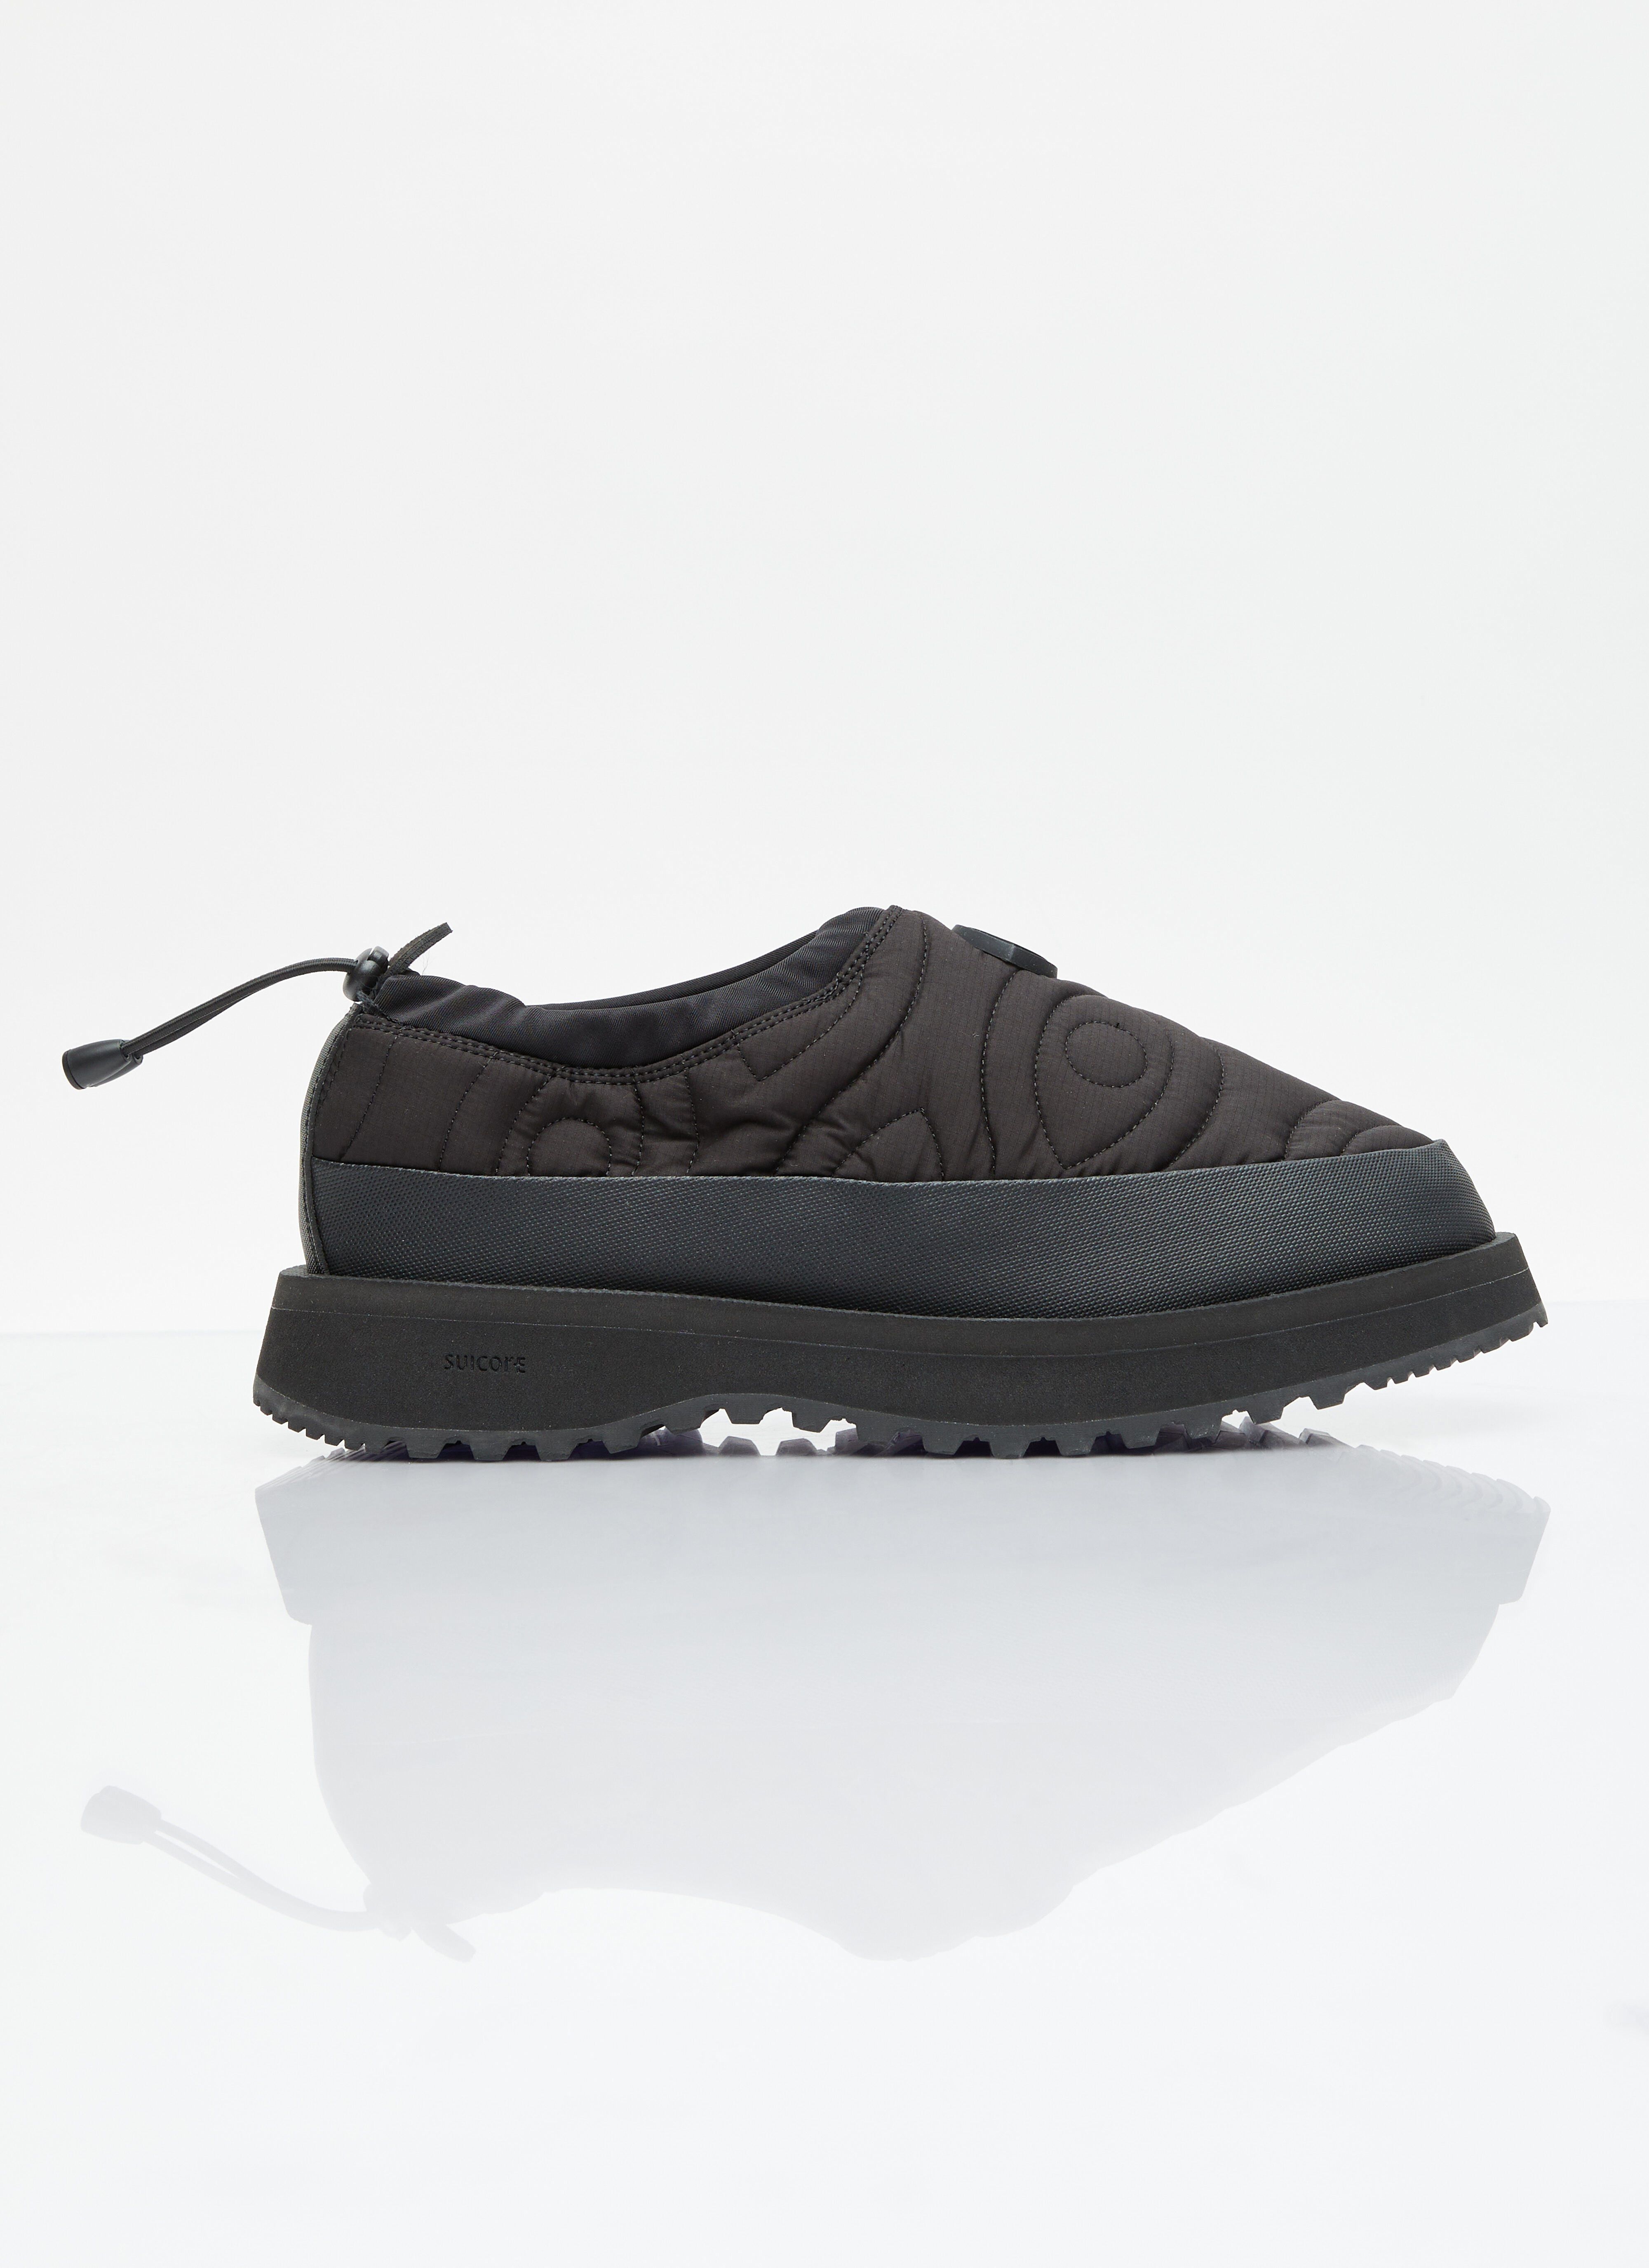 Suicoke Insulated Loafers Black sui0156003